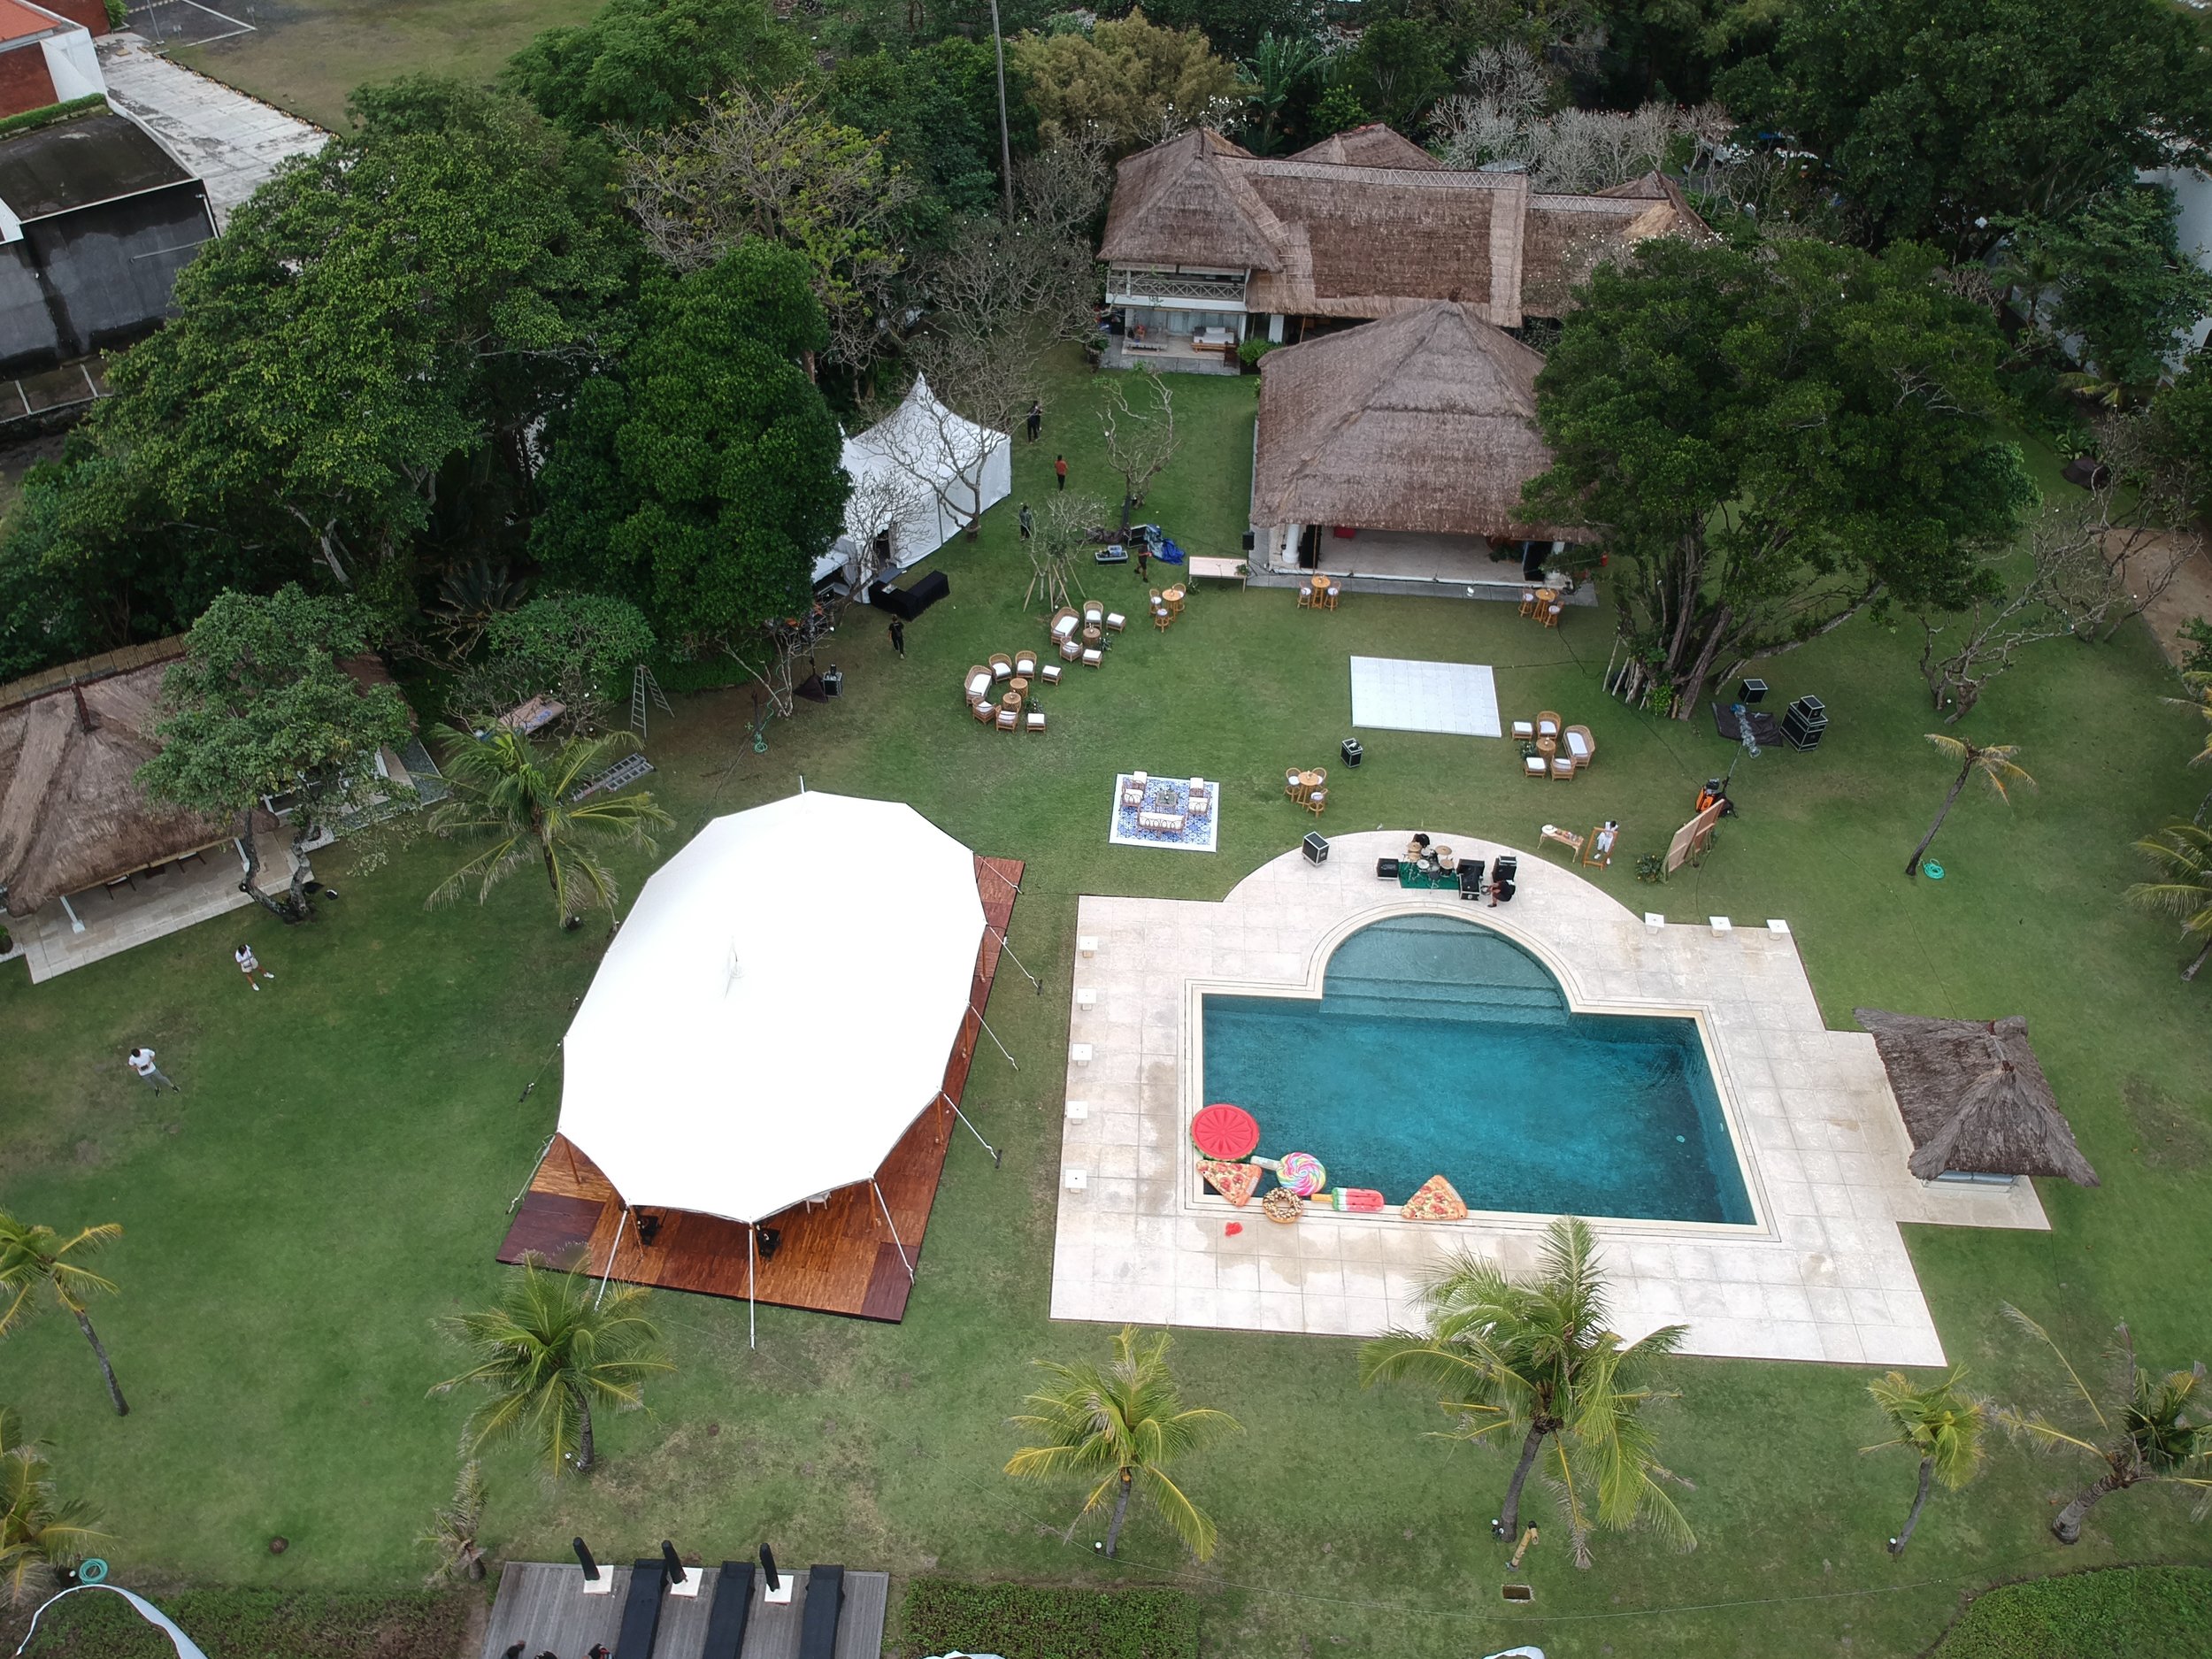 Overview of Atas Ombak, Image from A Tent in Bali